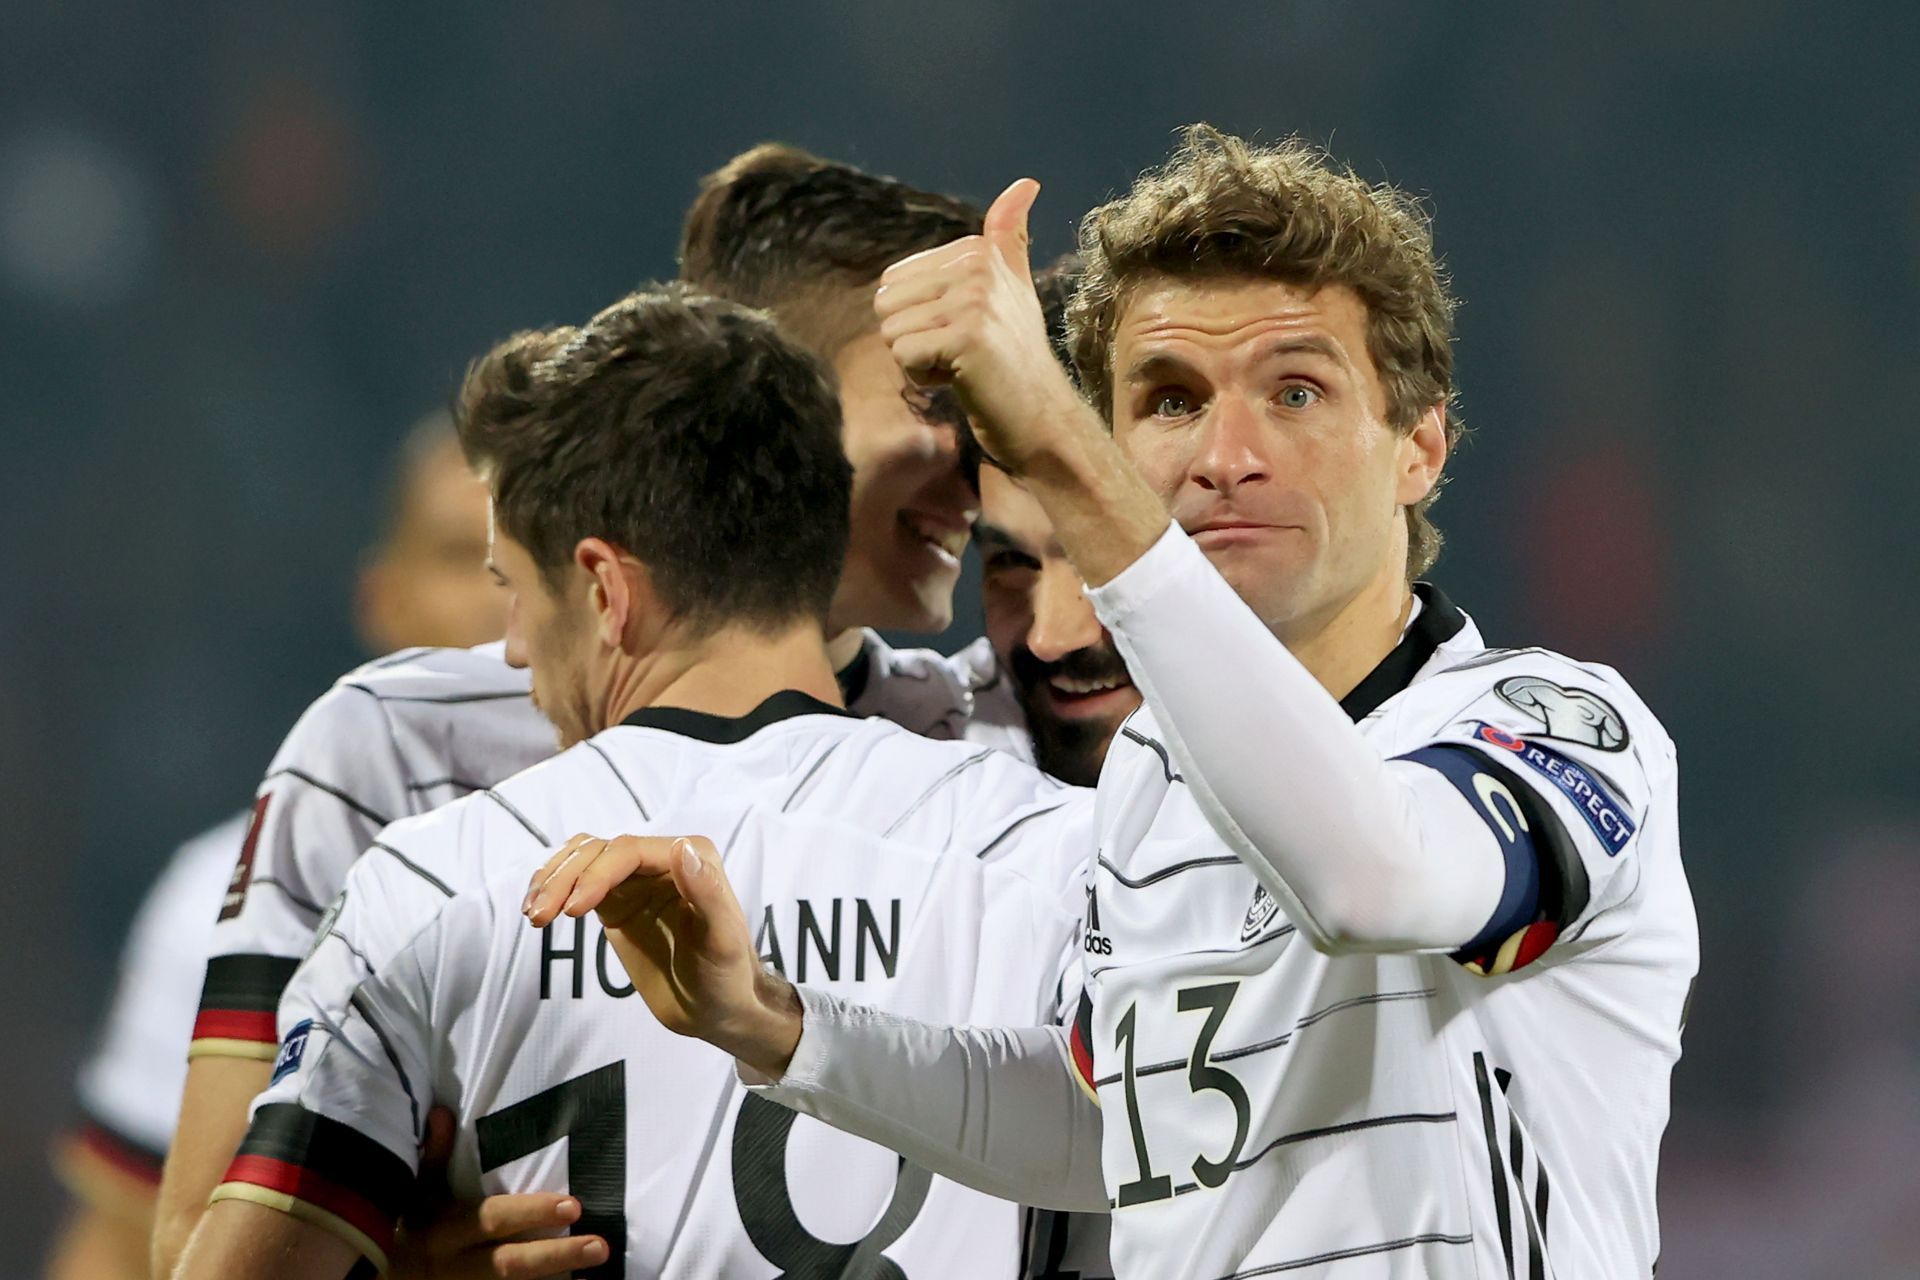 Germany will be looking to bounce back after a disappointing 2018 World Cup.